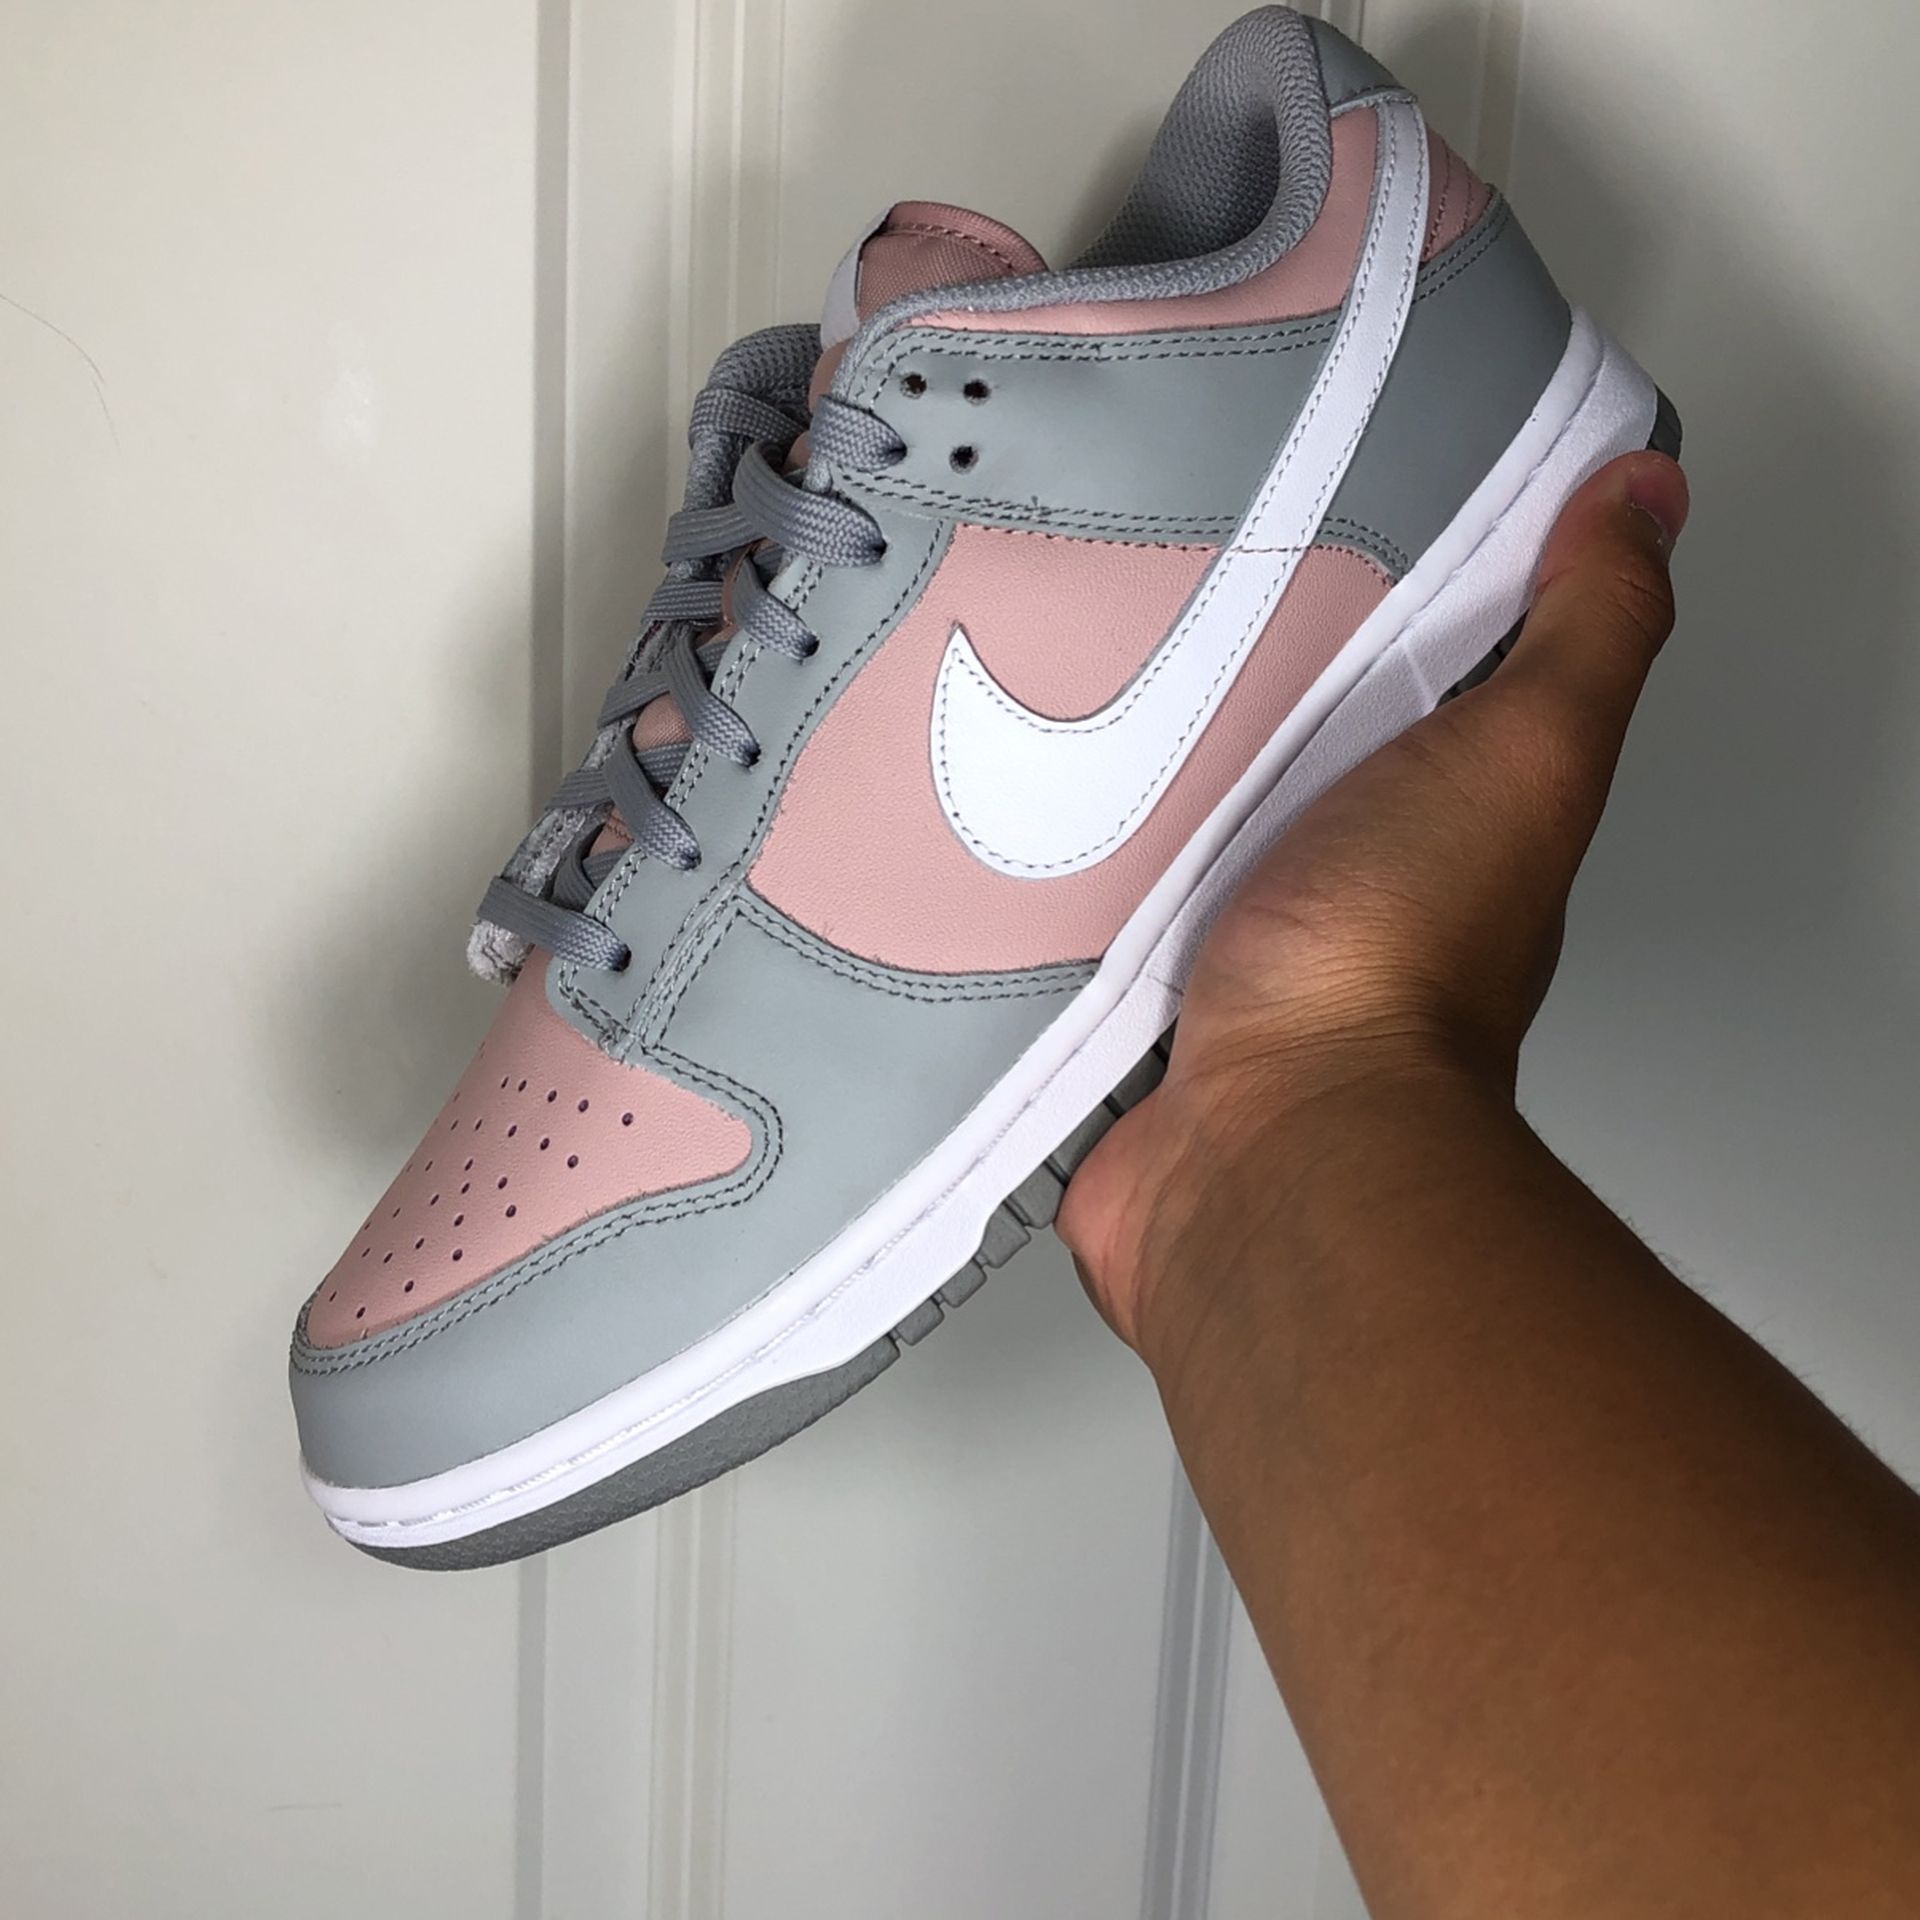 Nike Dunk Low Oxford Pink size 9w And 8.5w. Size Conversion Down Below!